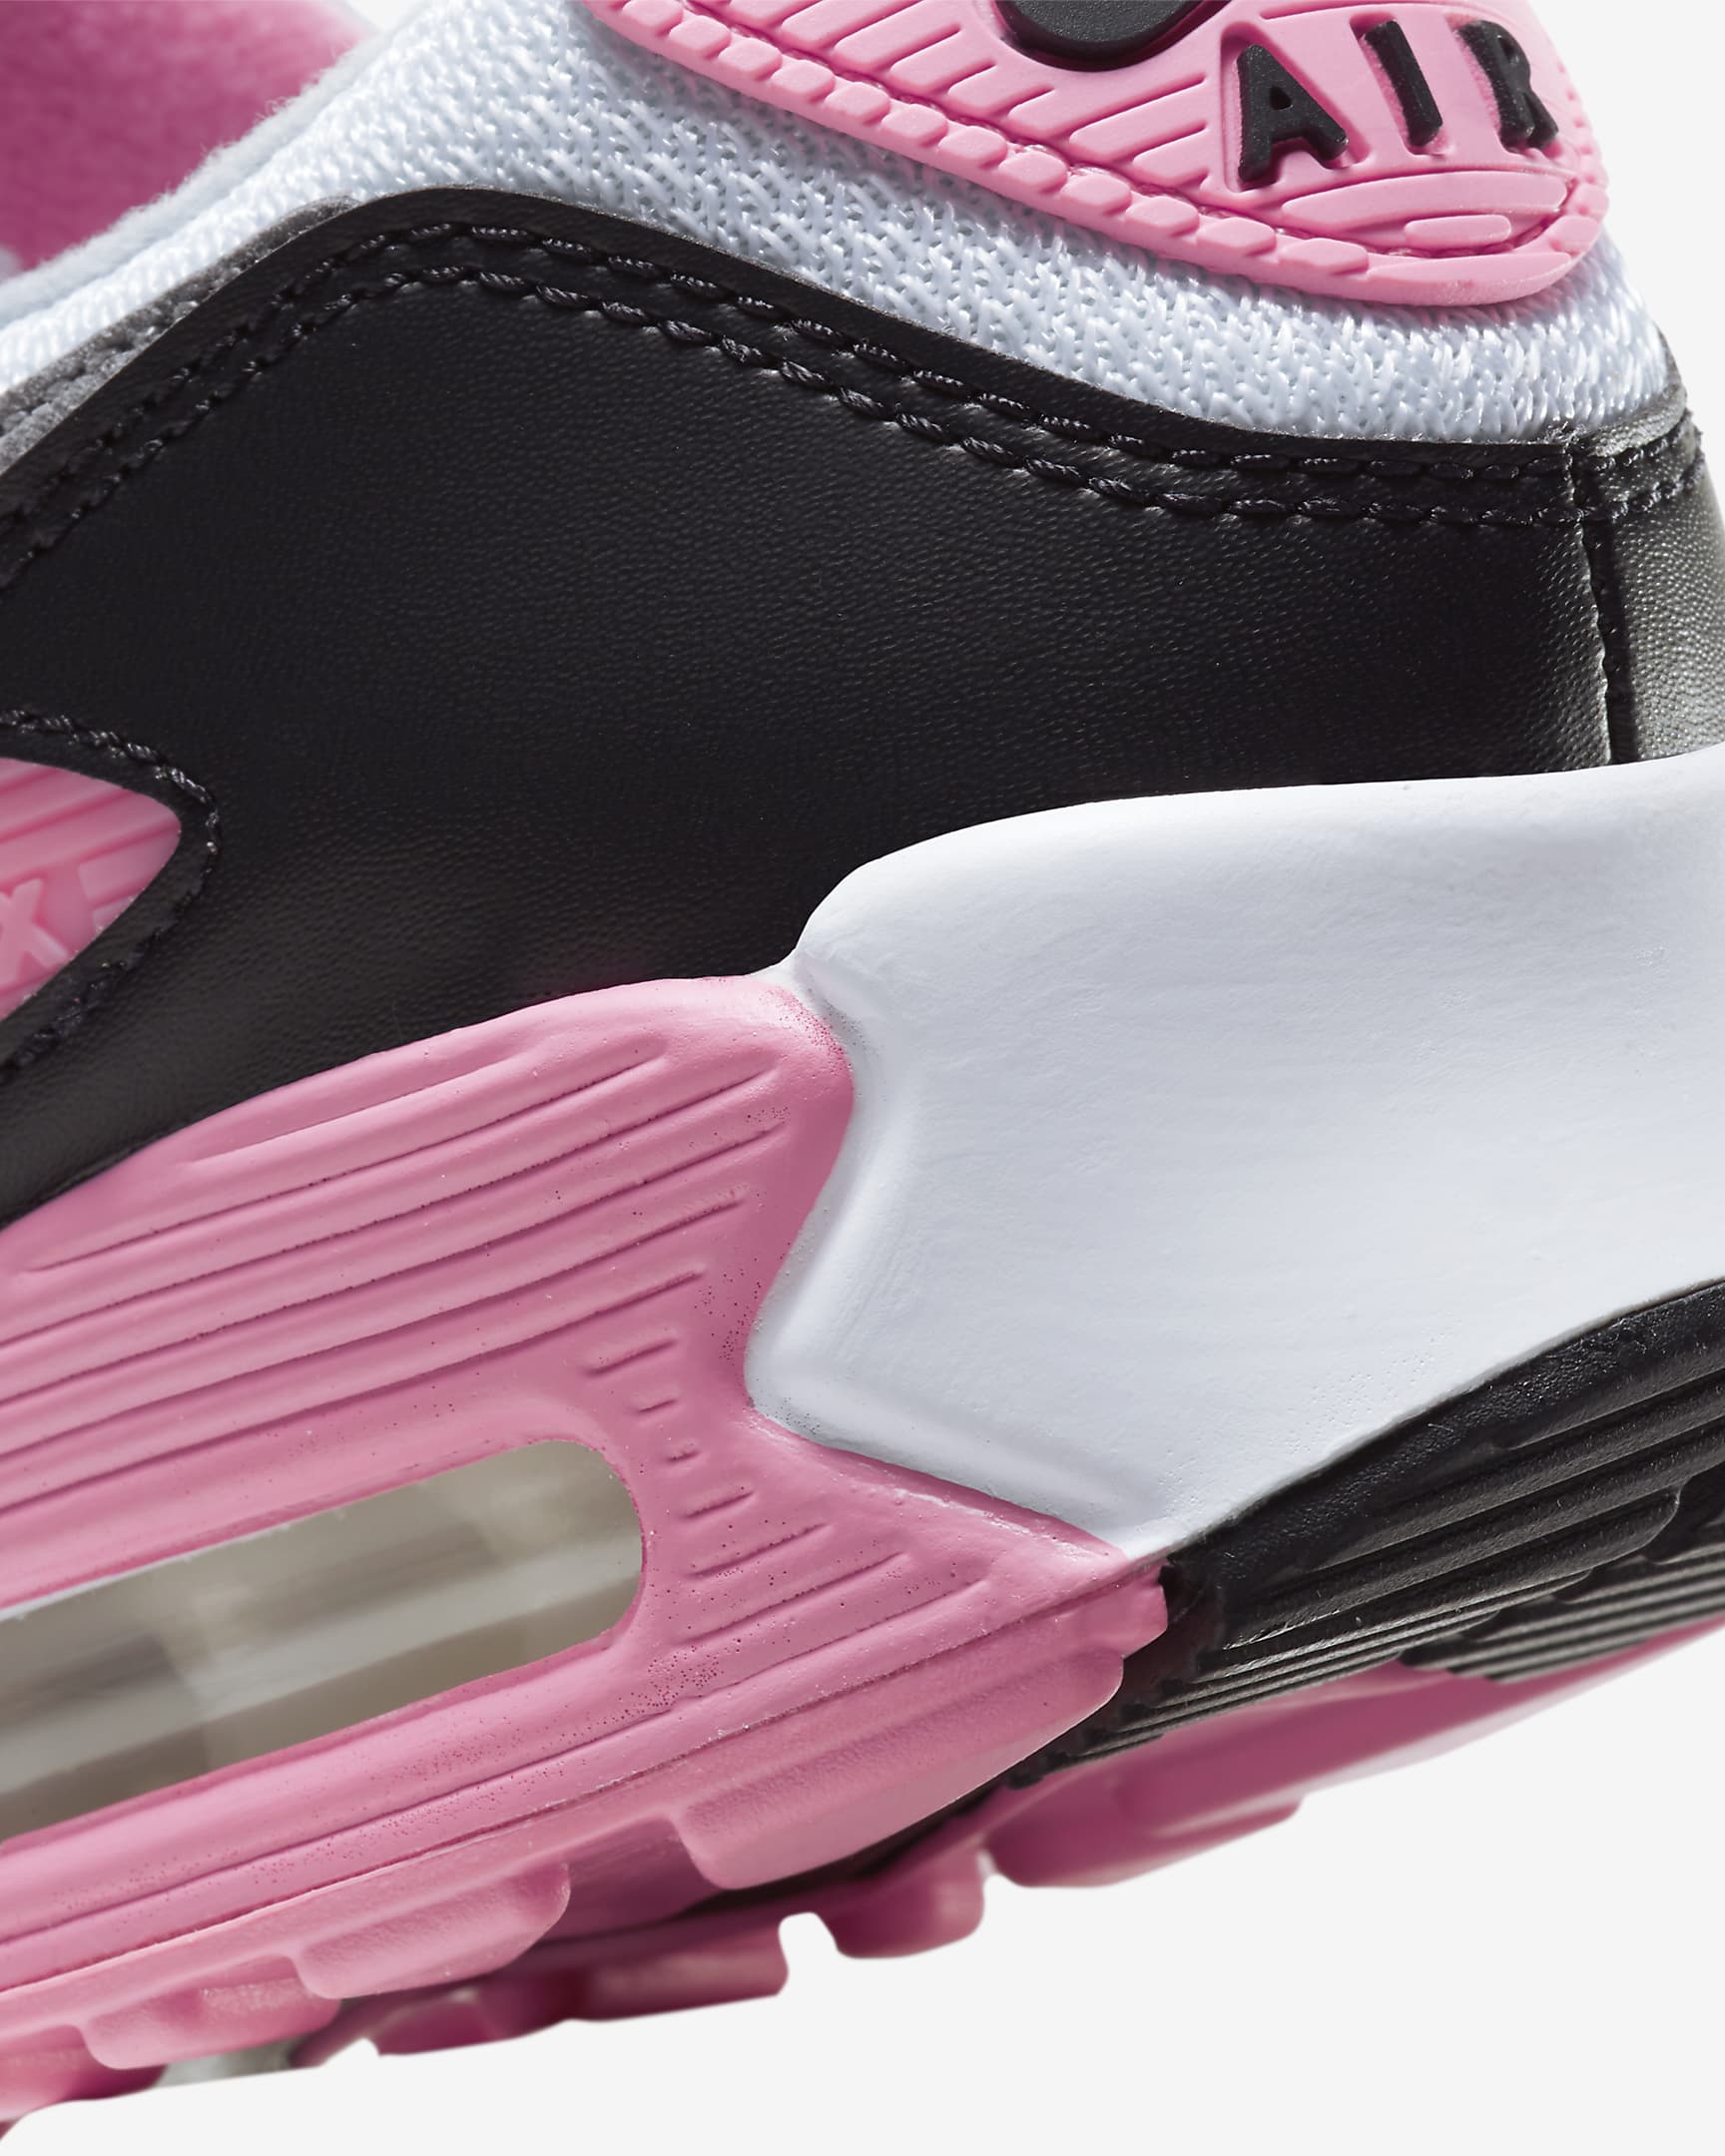 Nike Air Max 90 Women's Shoes - White/Rose/Black/Particle Grey